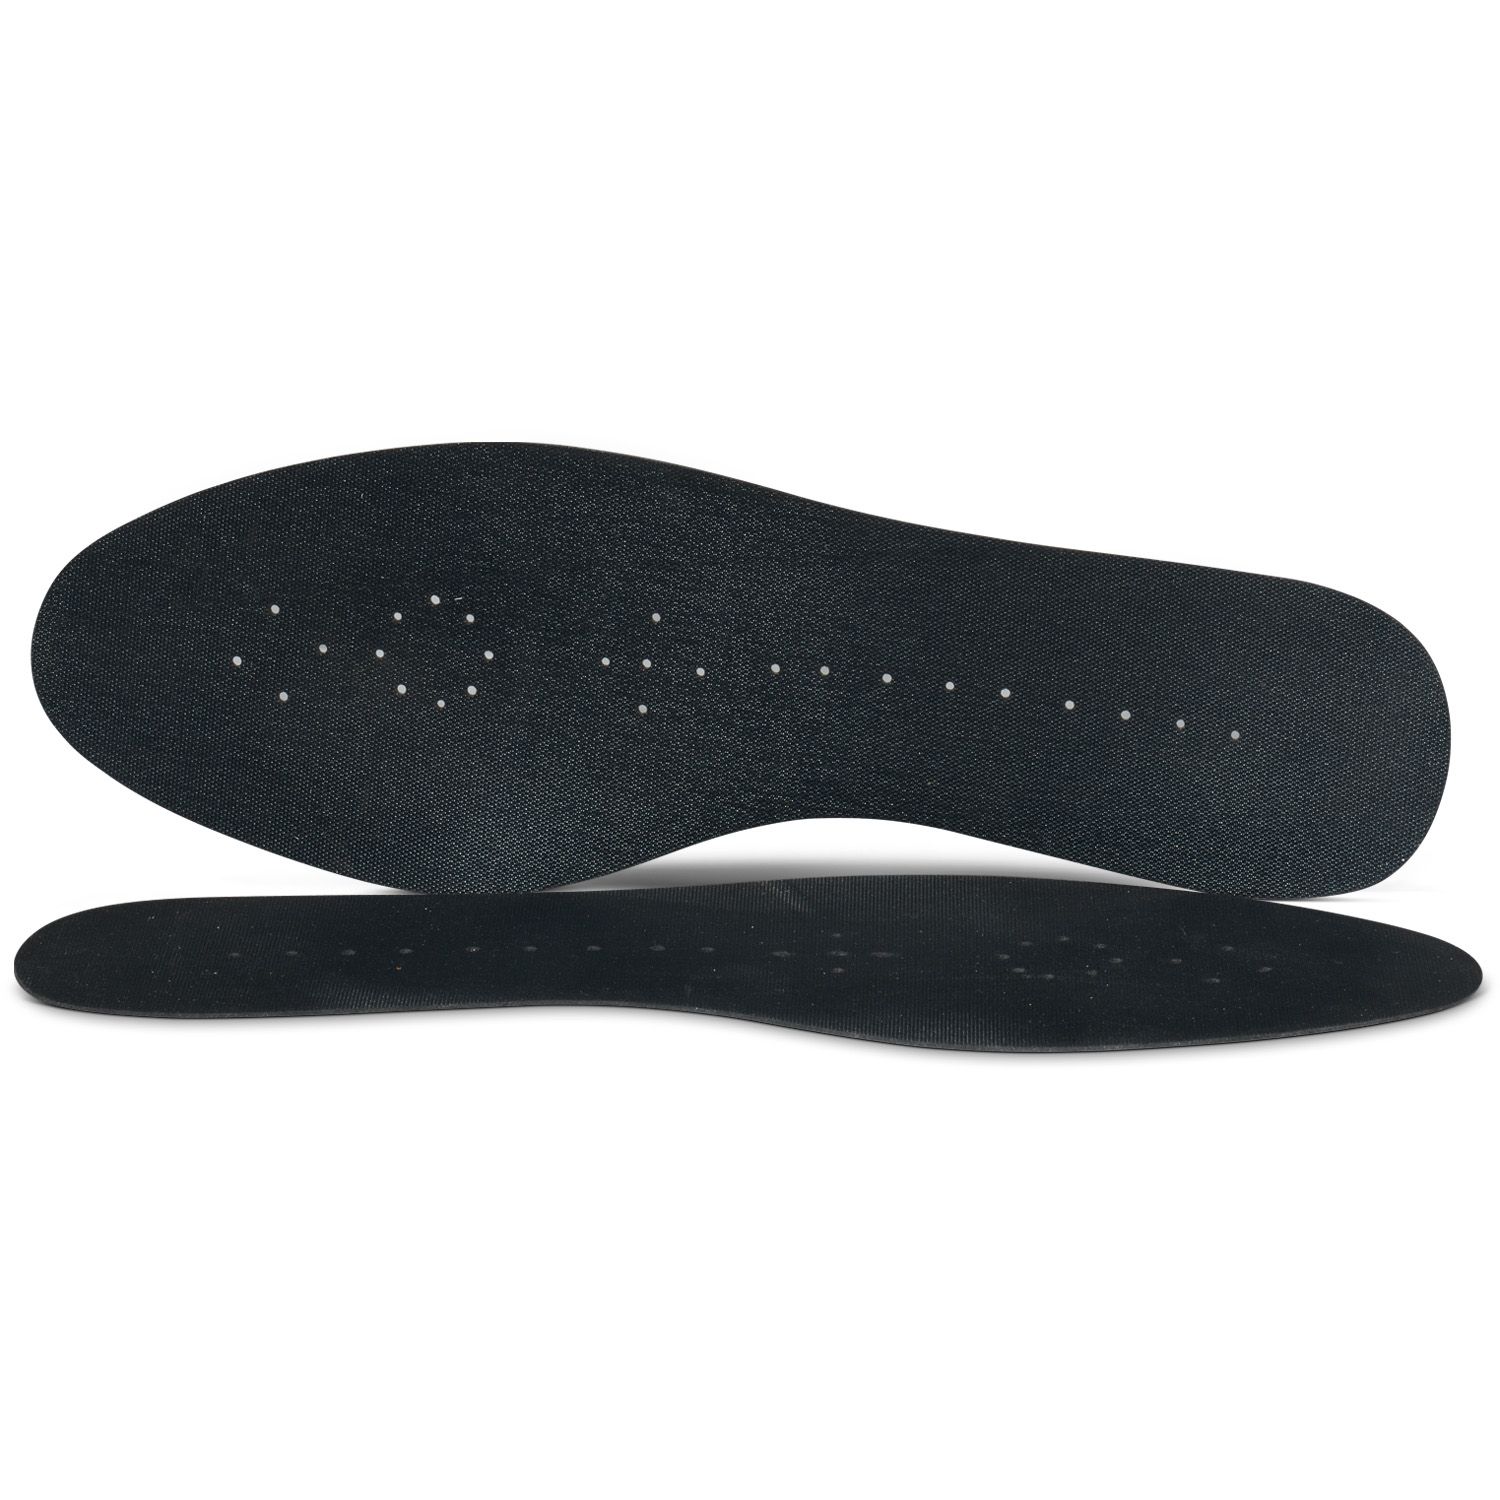 solelution cycling insoles for sale